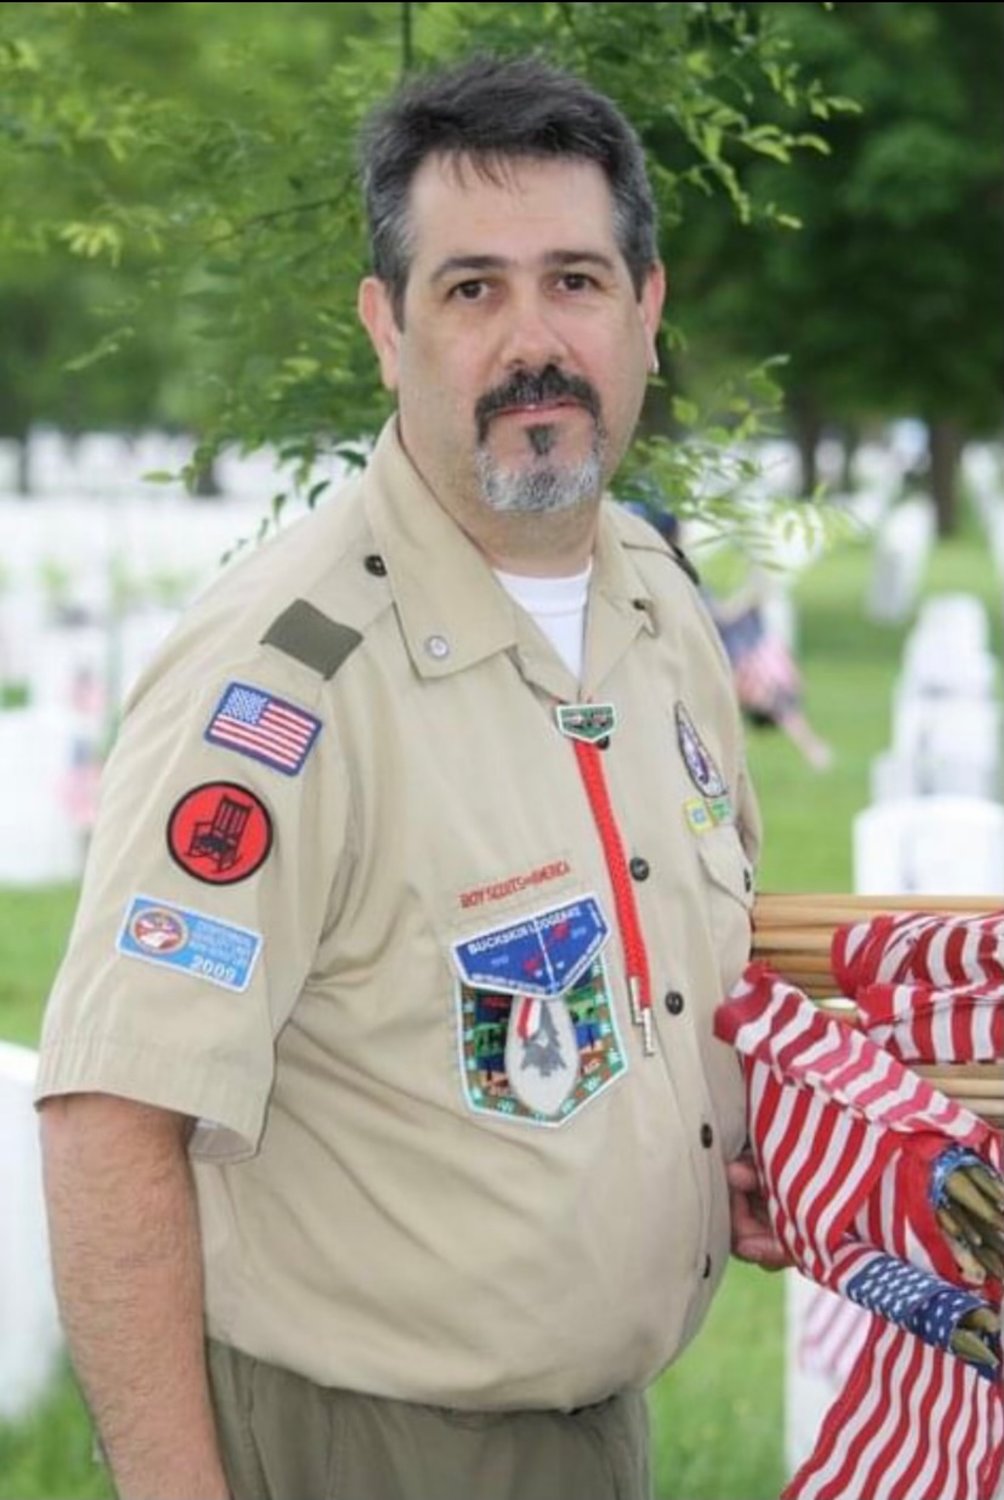 Lynbrook resident Nicholas Sincinito is the Herald’s 2021 Person of the Year, honored for his efforts in the community, including serving as the leader of Troop 121 for many years.